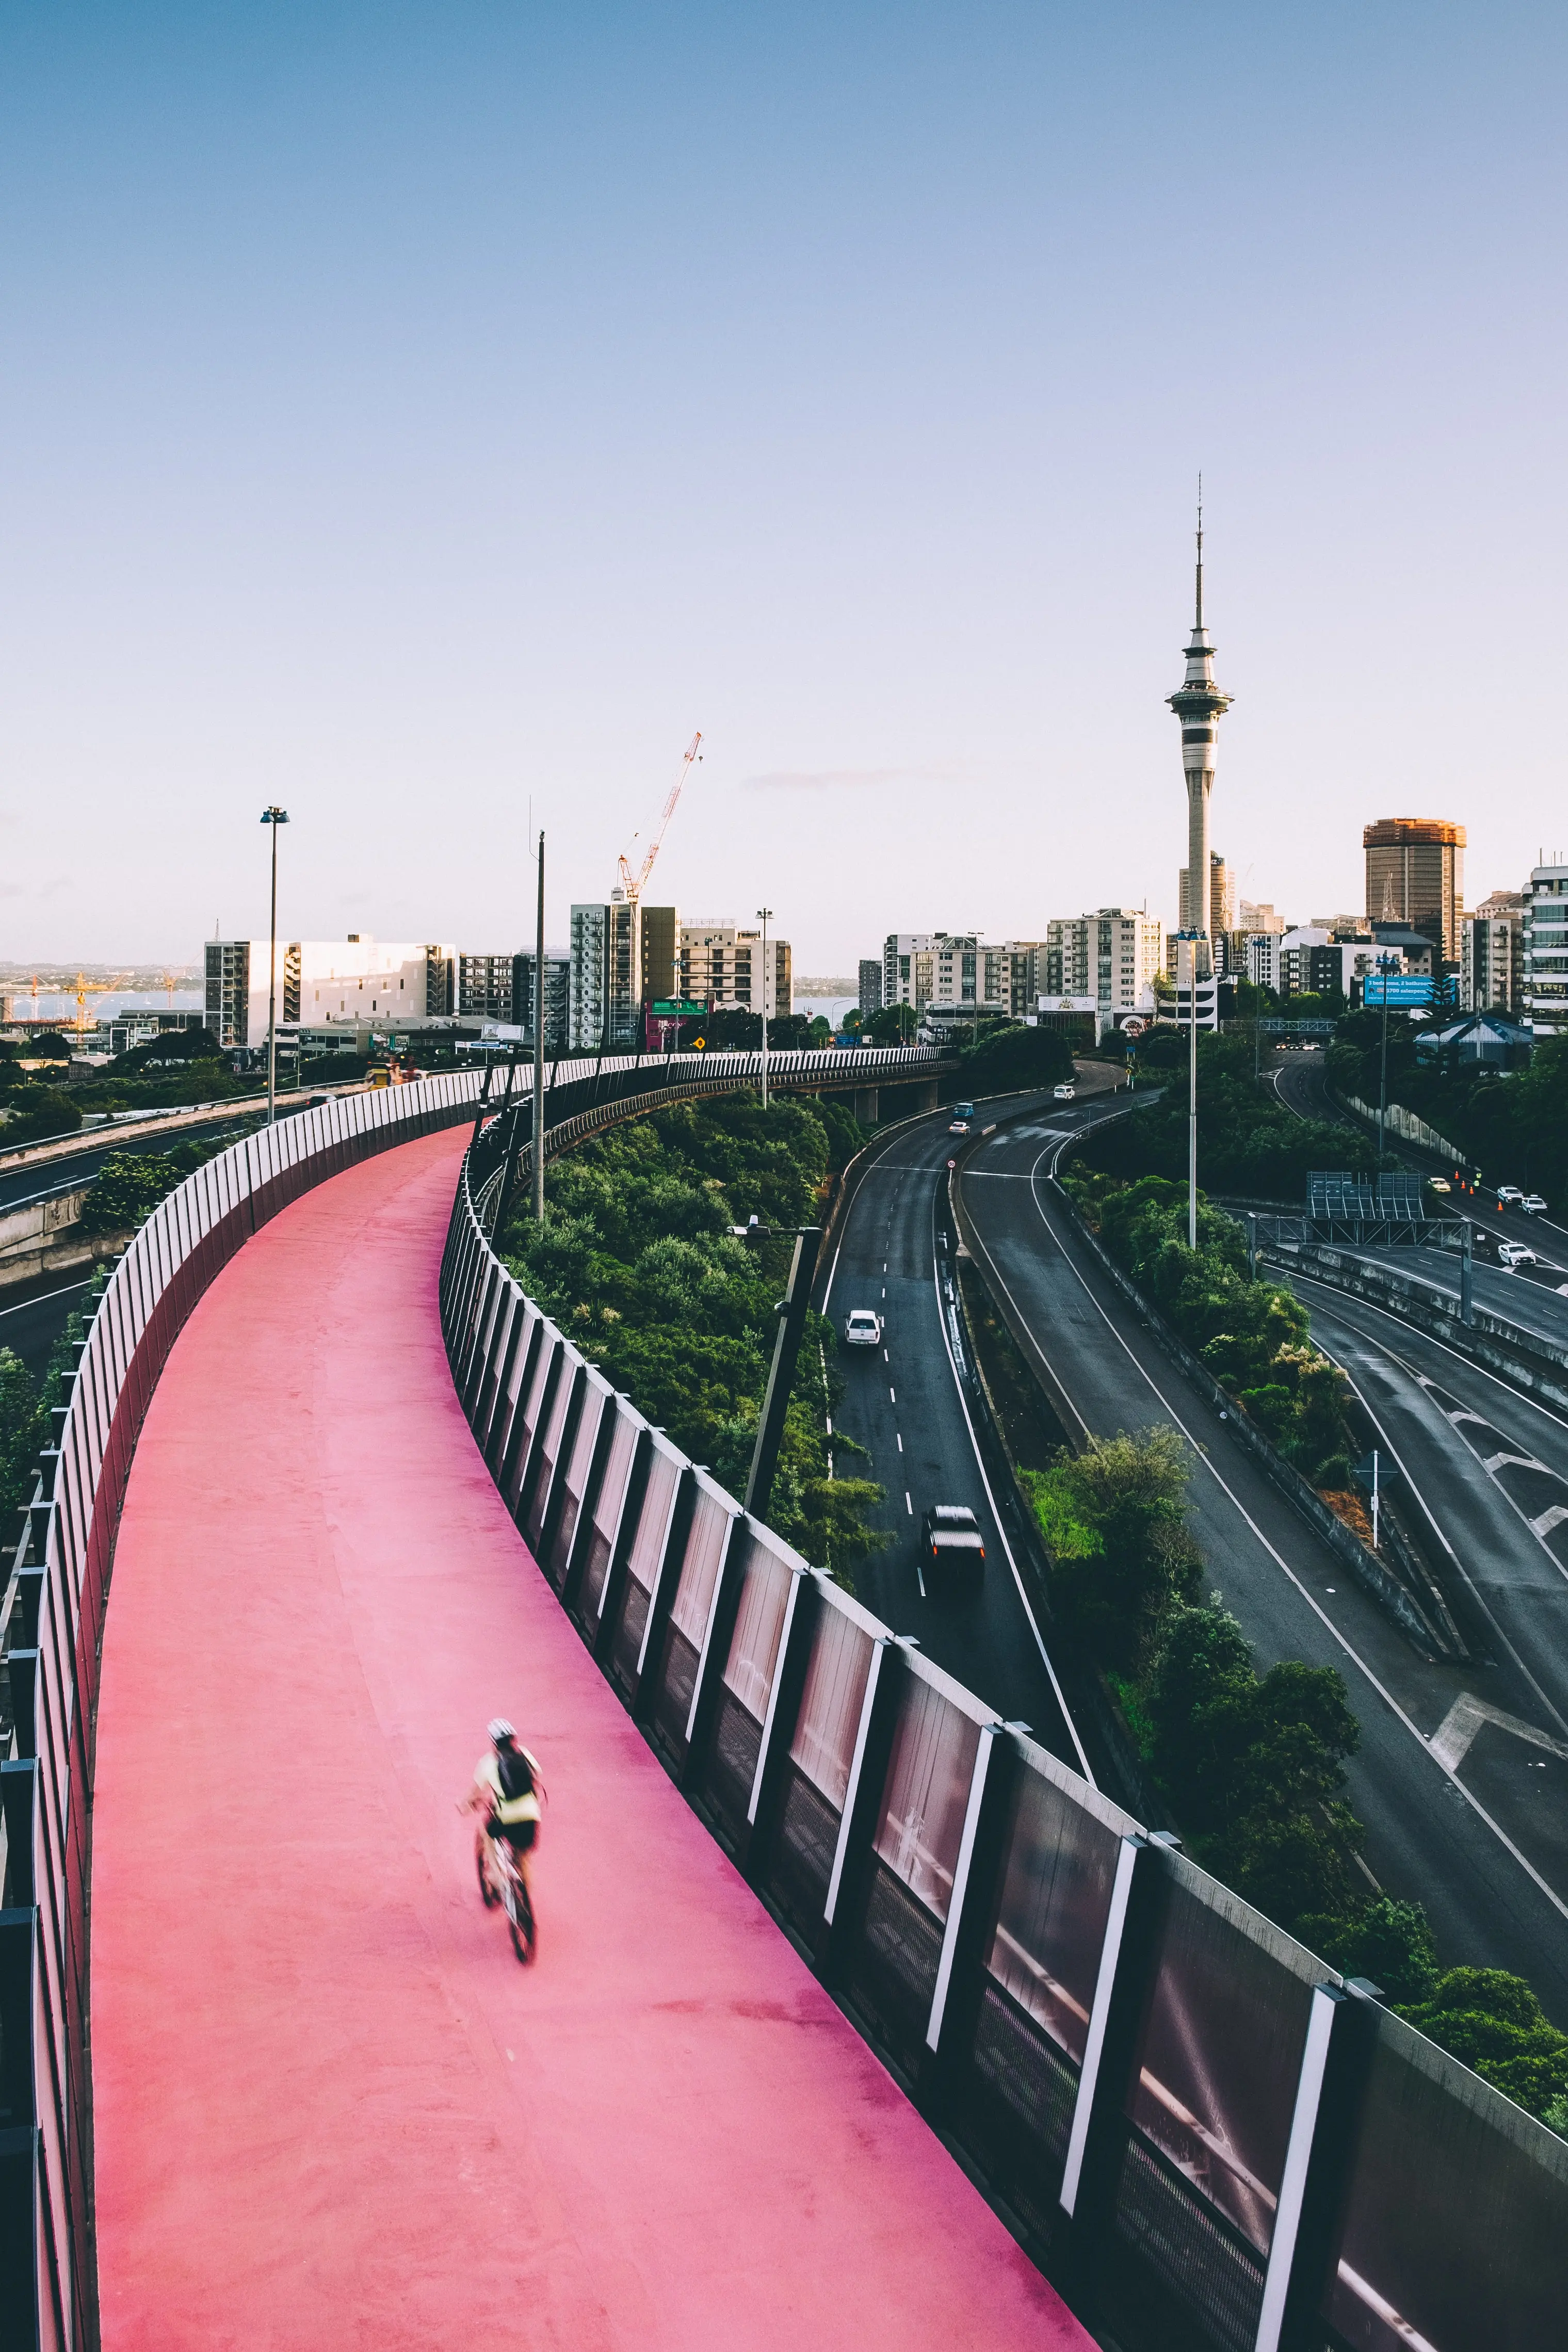 colourful bridge in auckland with cyclist on it